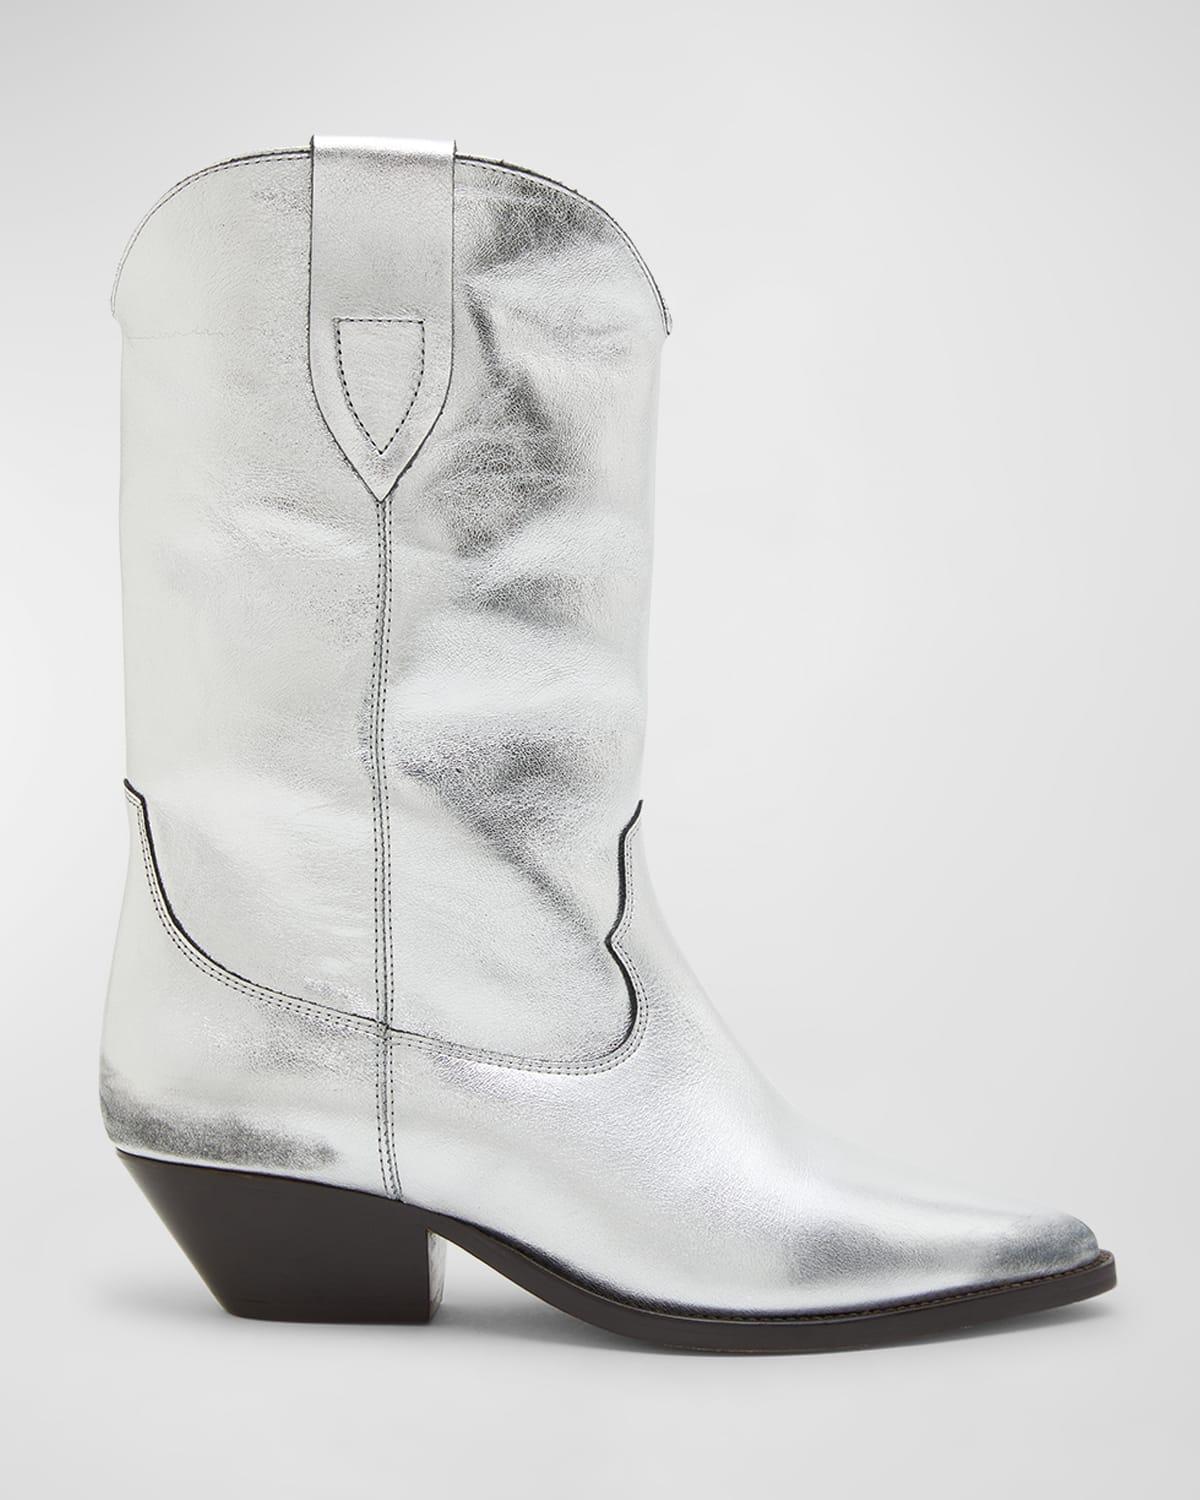 Isabel Marant Metallic Western Boots in White | Lyst